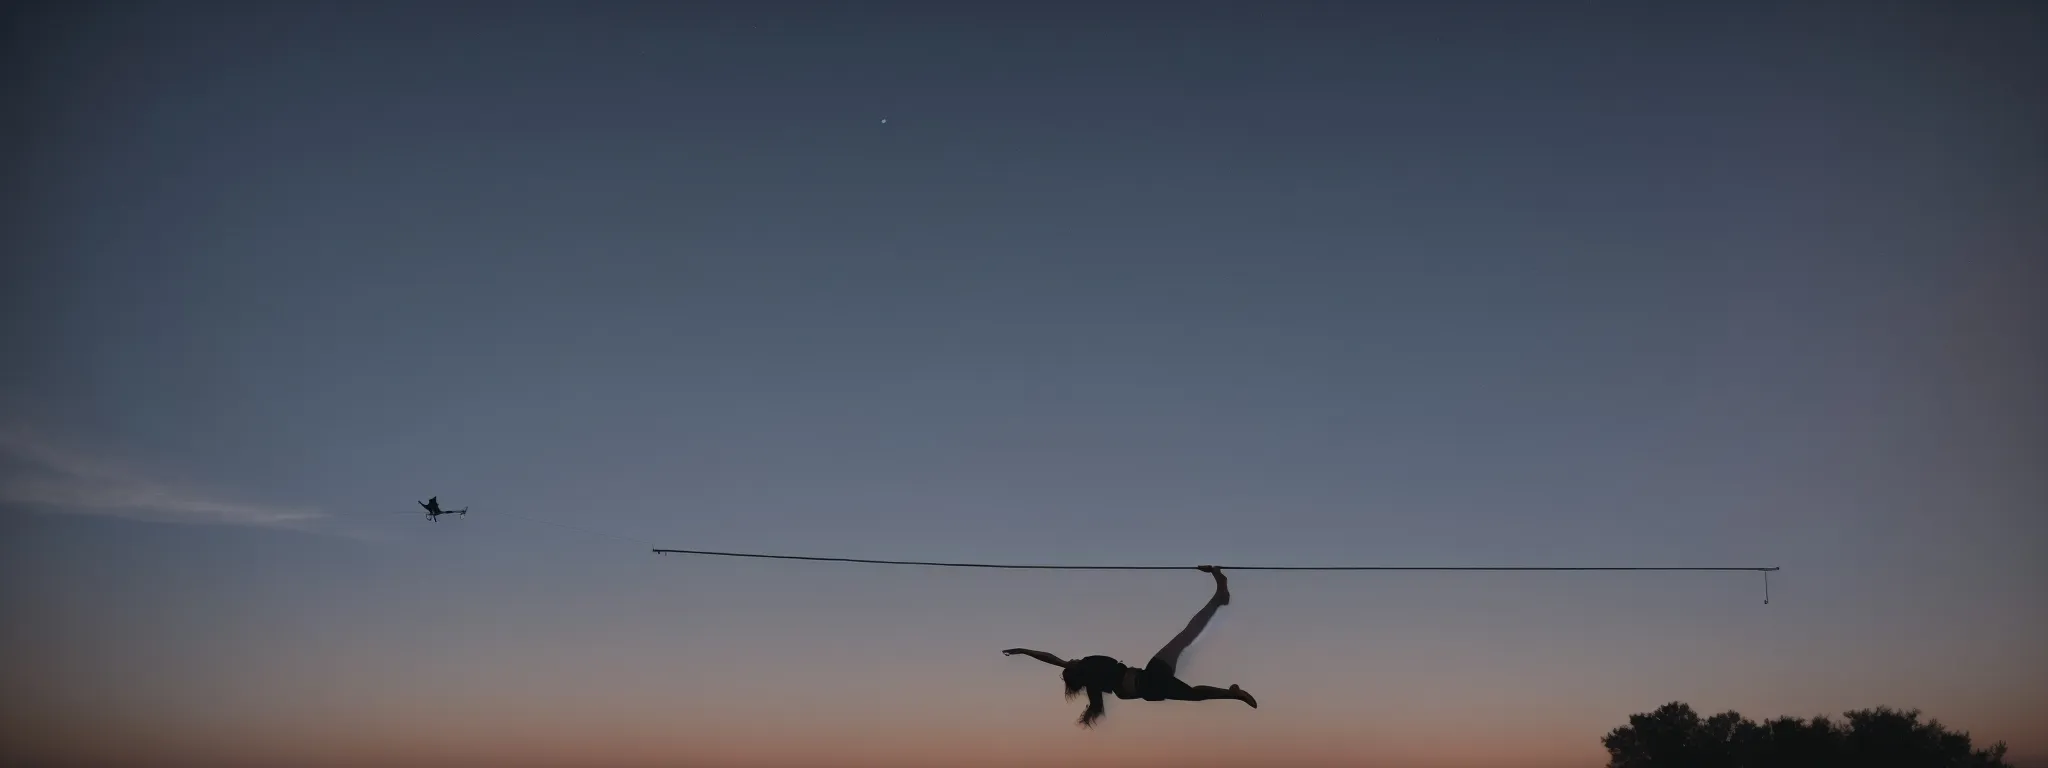 A Silhouetted Acrobat Balancing On A Wire Against A Twilight Sky, Symbolizing The Delicate Data Migration Process.